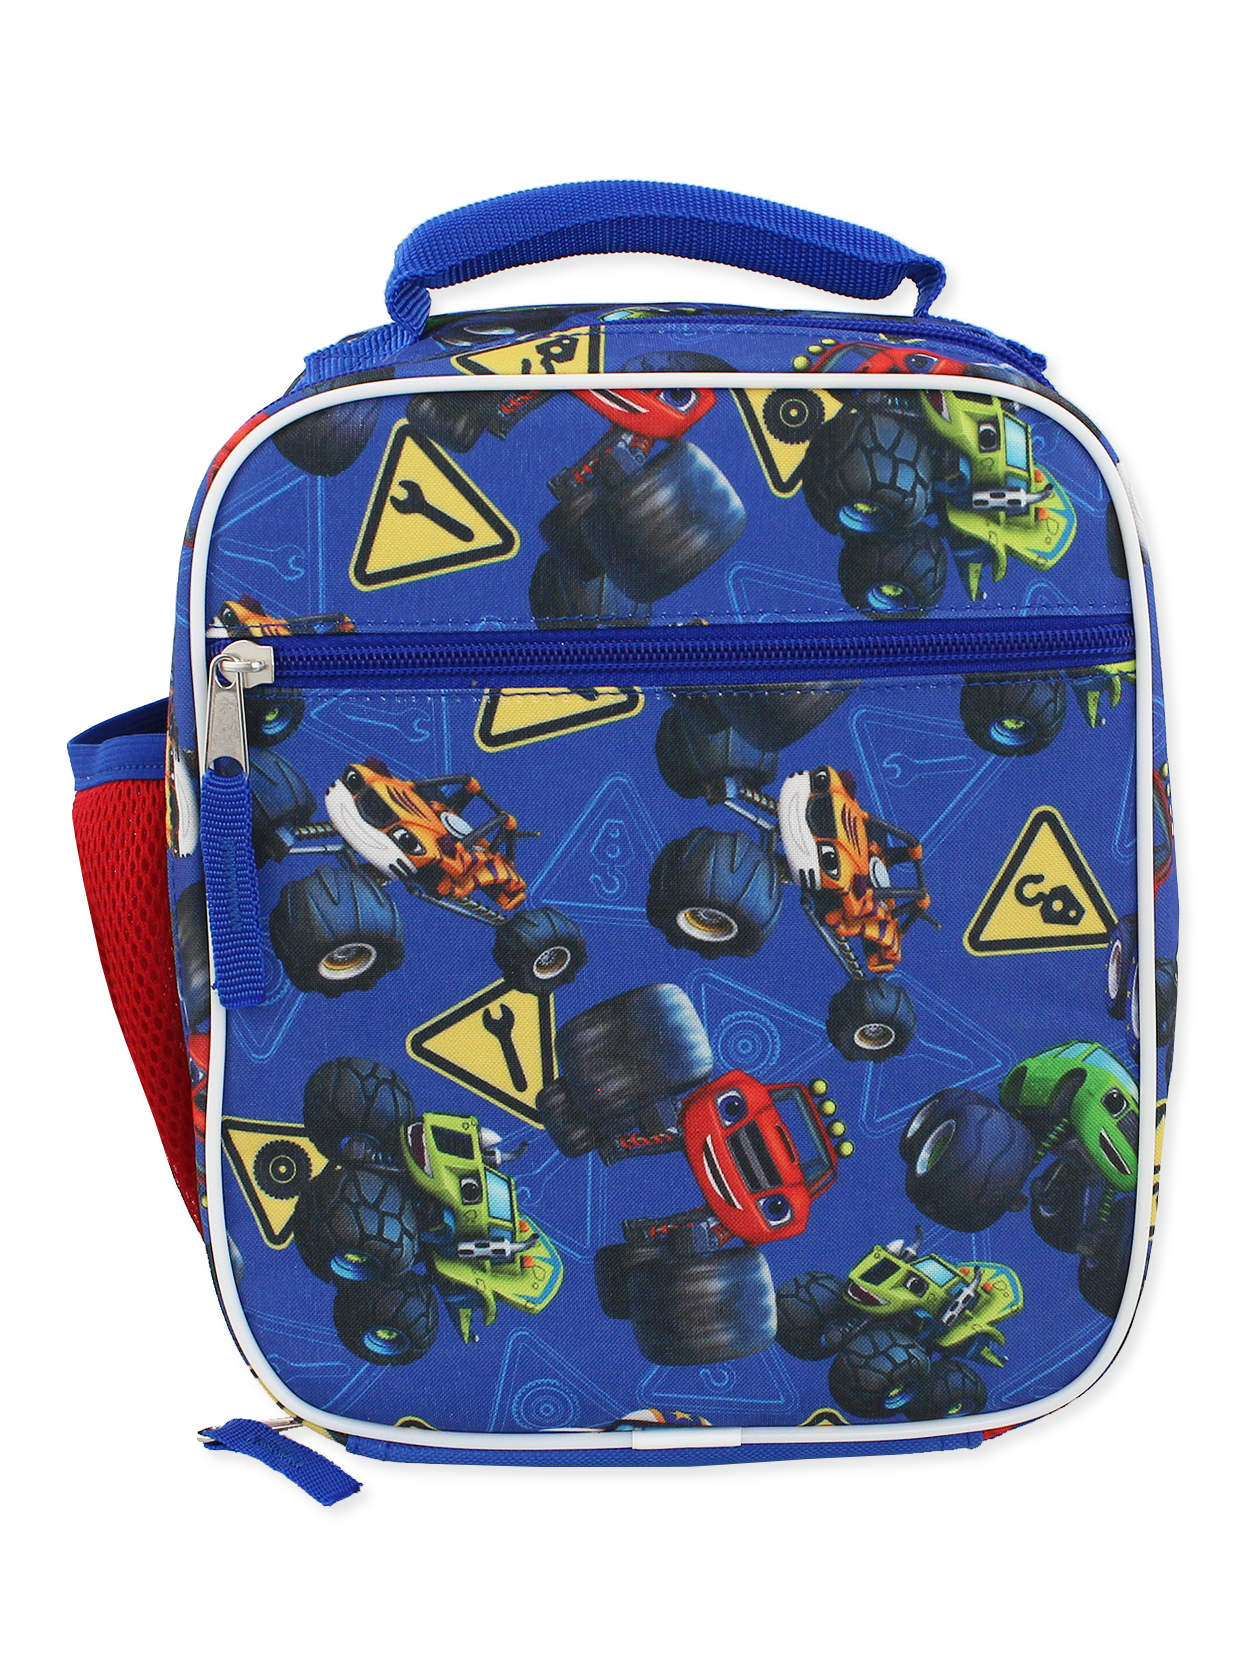 Nickelodeon Blaze and The Monster Machines Boys Girls Soft Insulated School Lunch Box (One size, Blue)